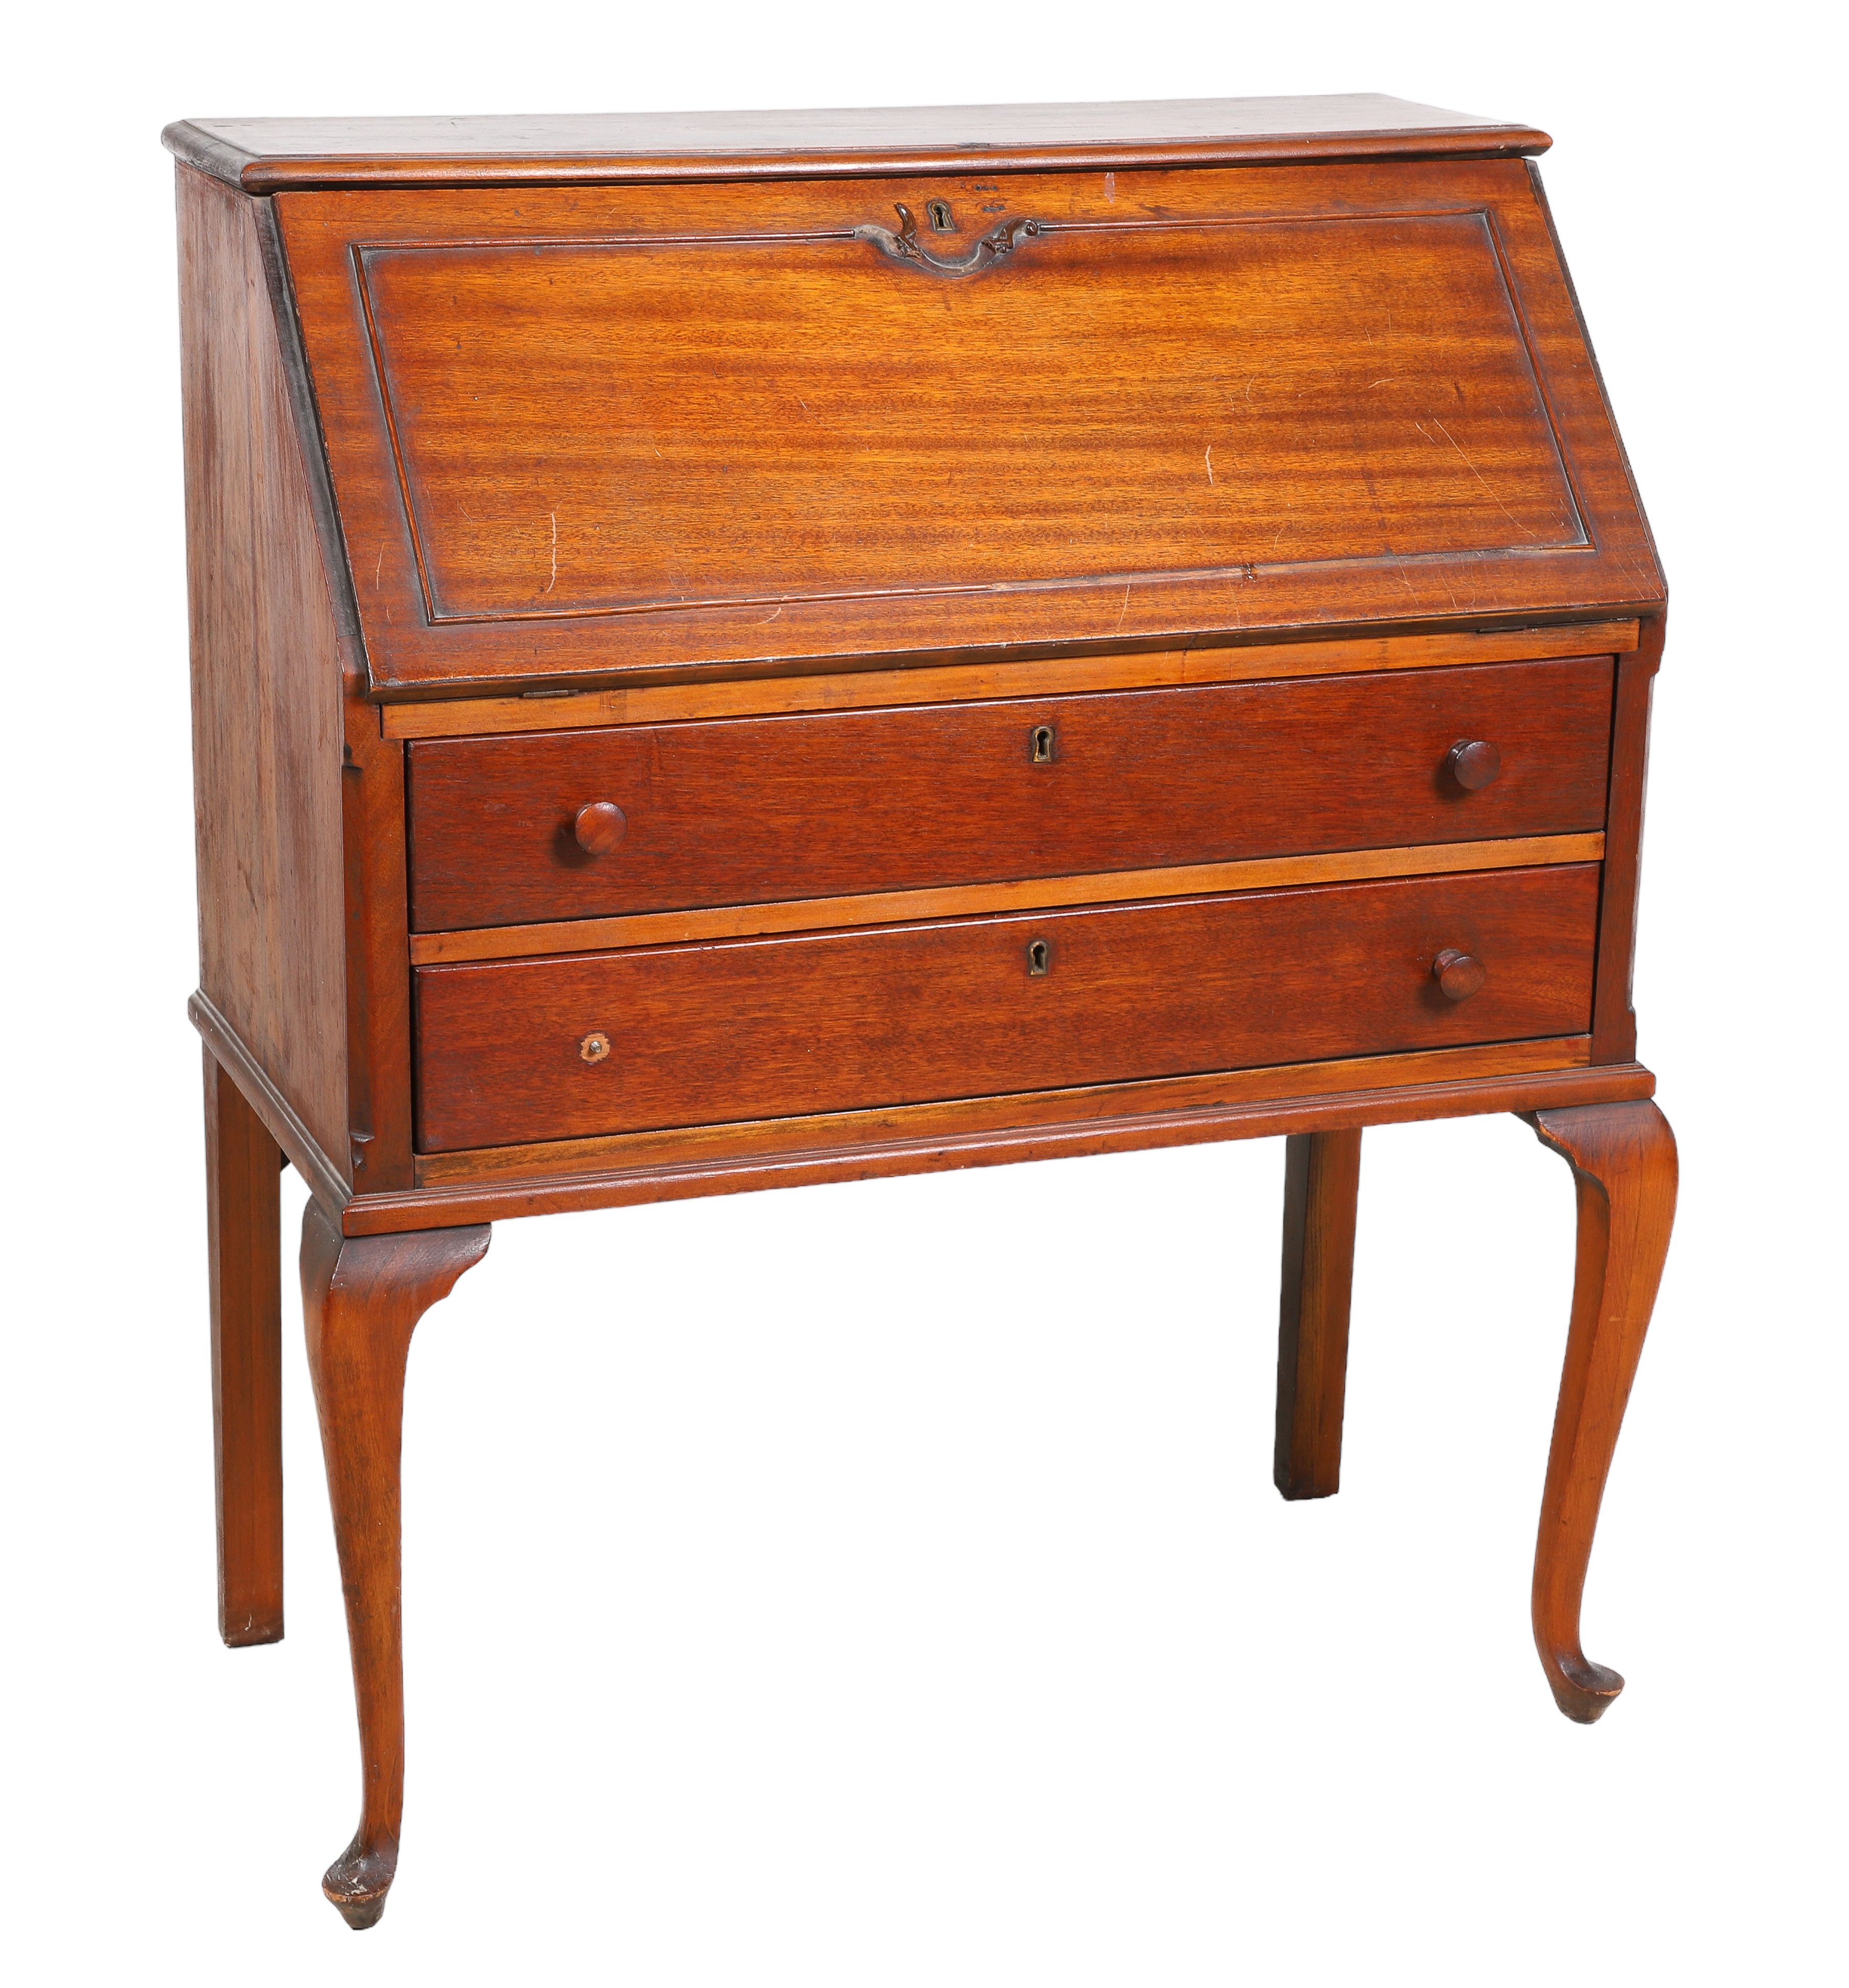 Queen Anne style mahogany slant